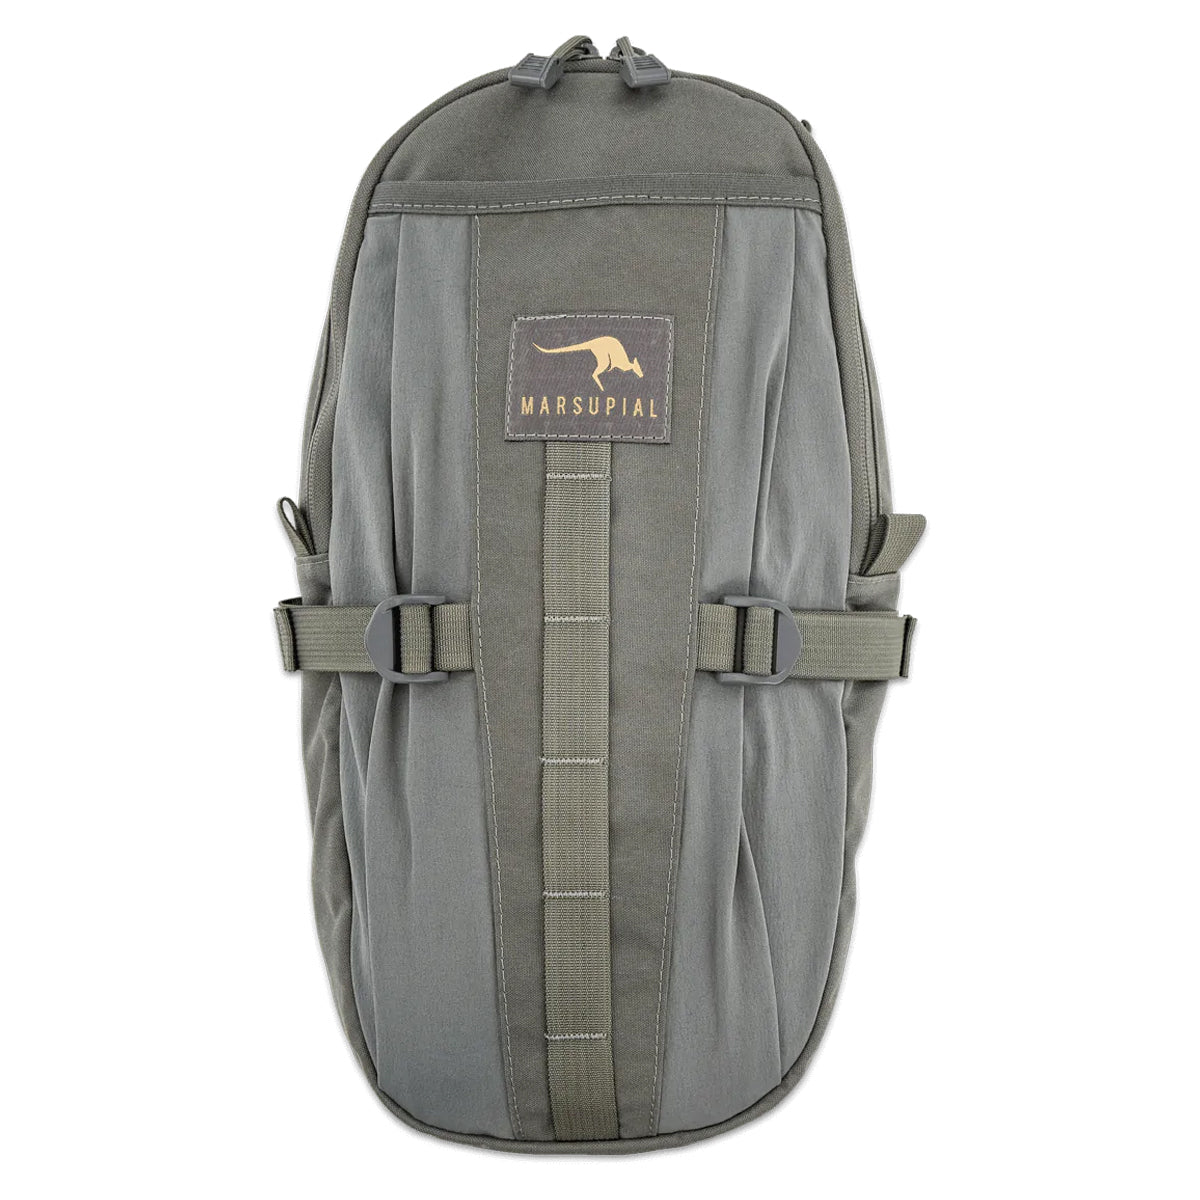 Marsupial Gear Hydration Pack in Foliage by GOHUNT | Marsupial Gear - GOHUNT Shop